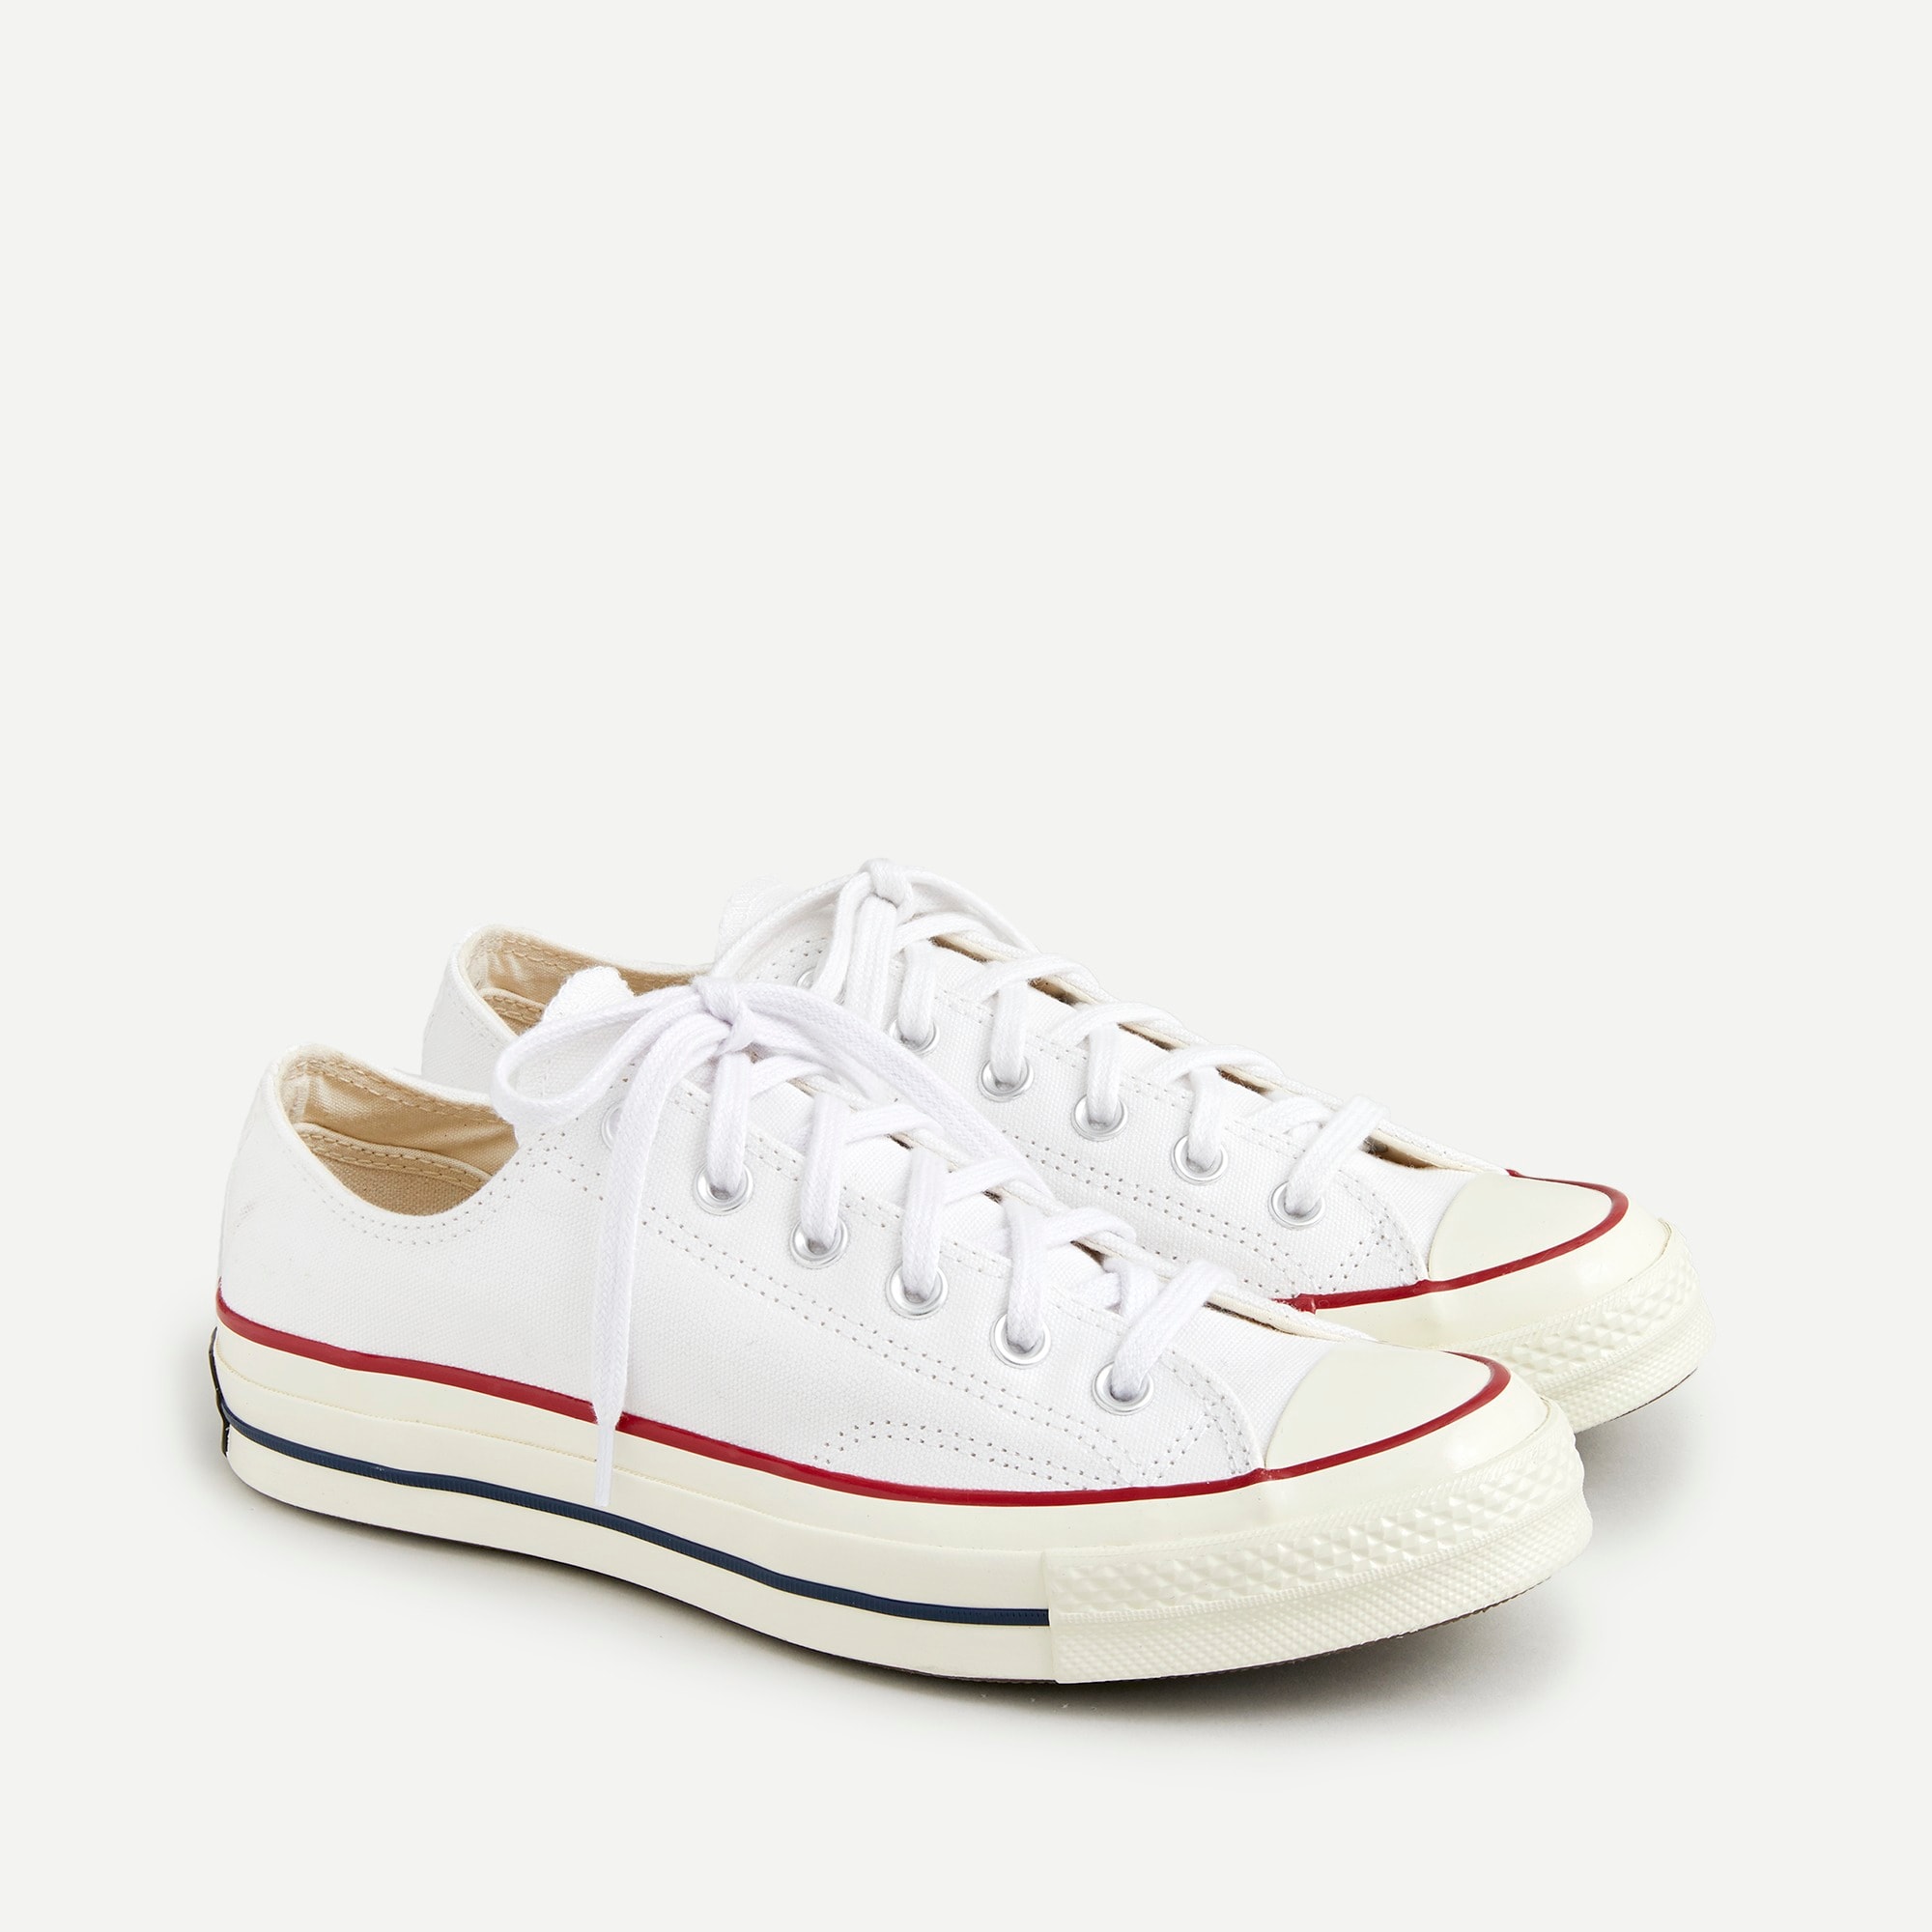 converse unisex chuck taylor all star low top sneaker